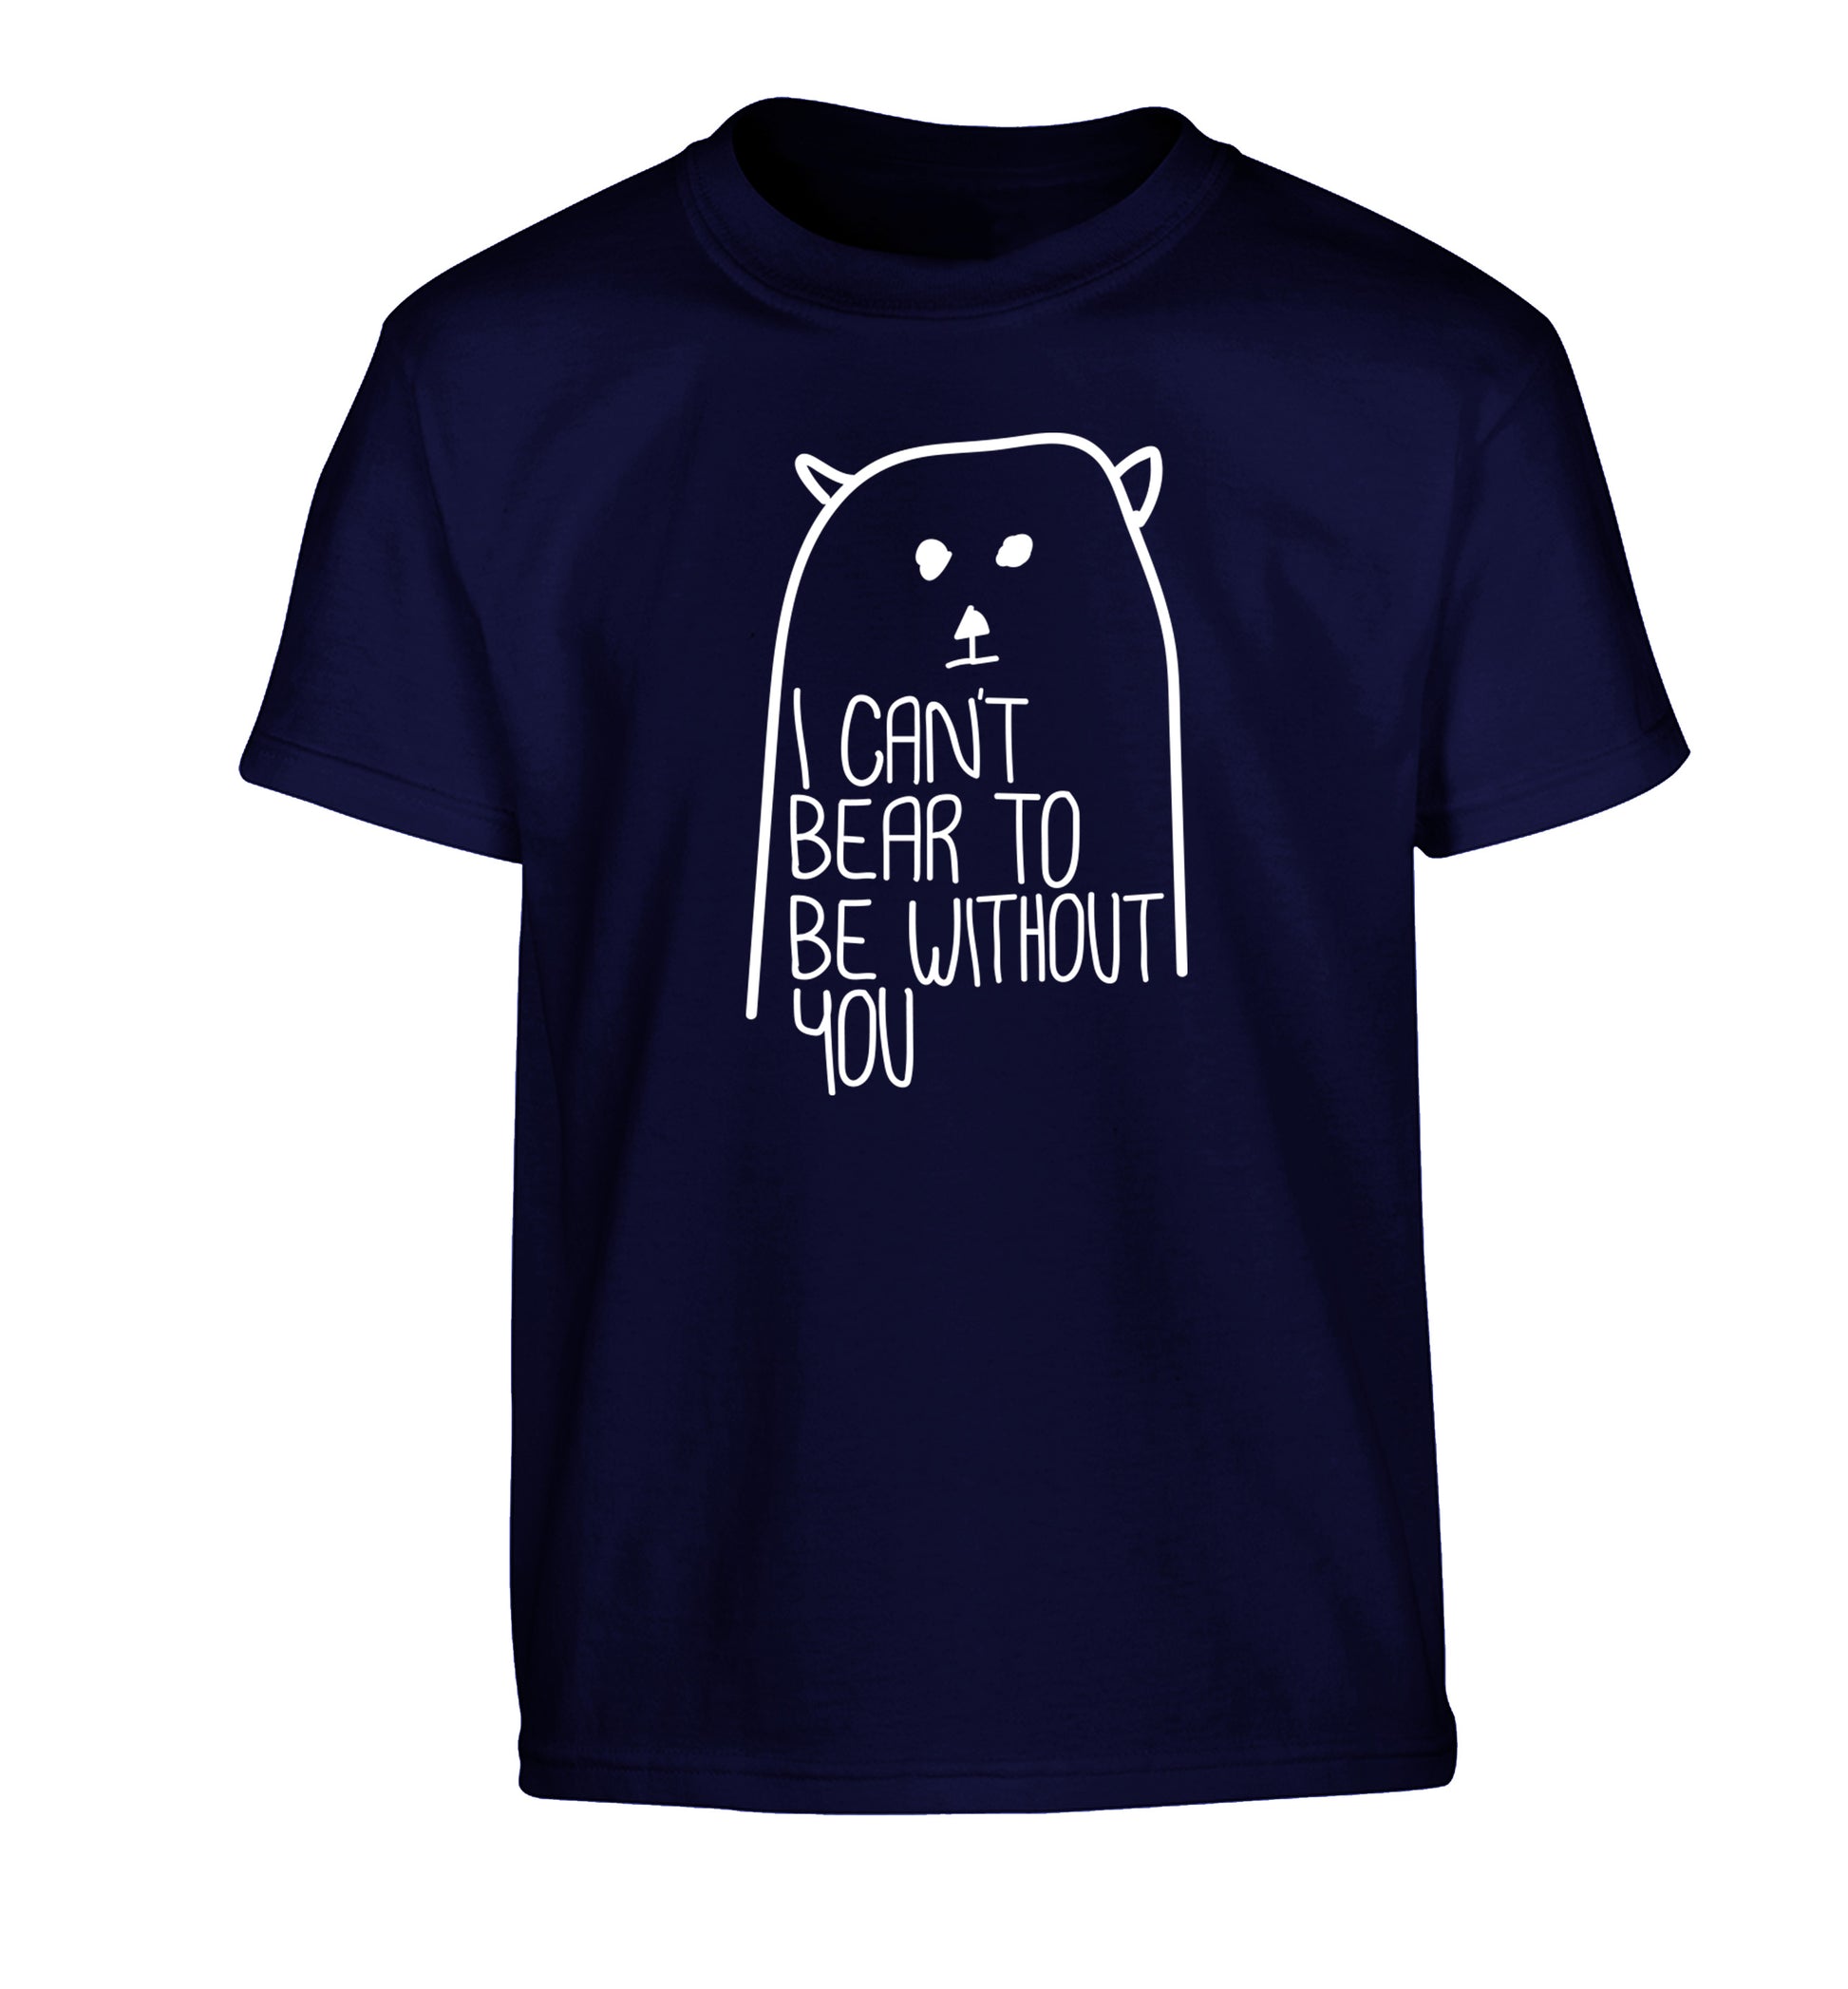 I can't bear to be without you Children's navy Tshirt 12-13 Years